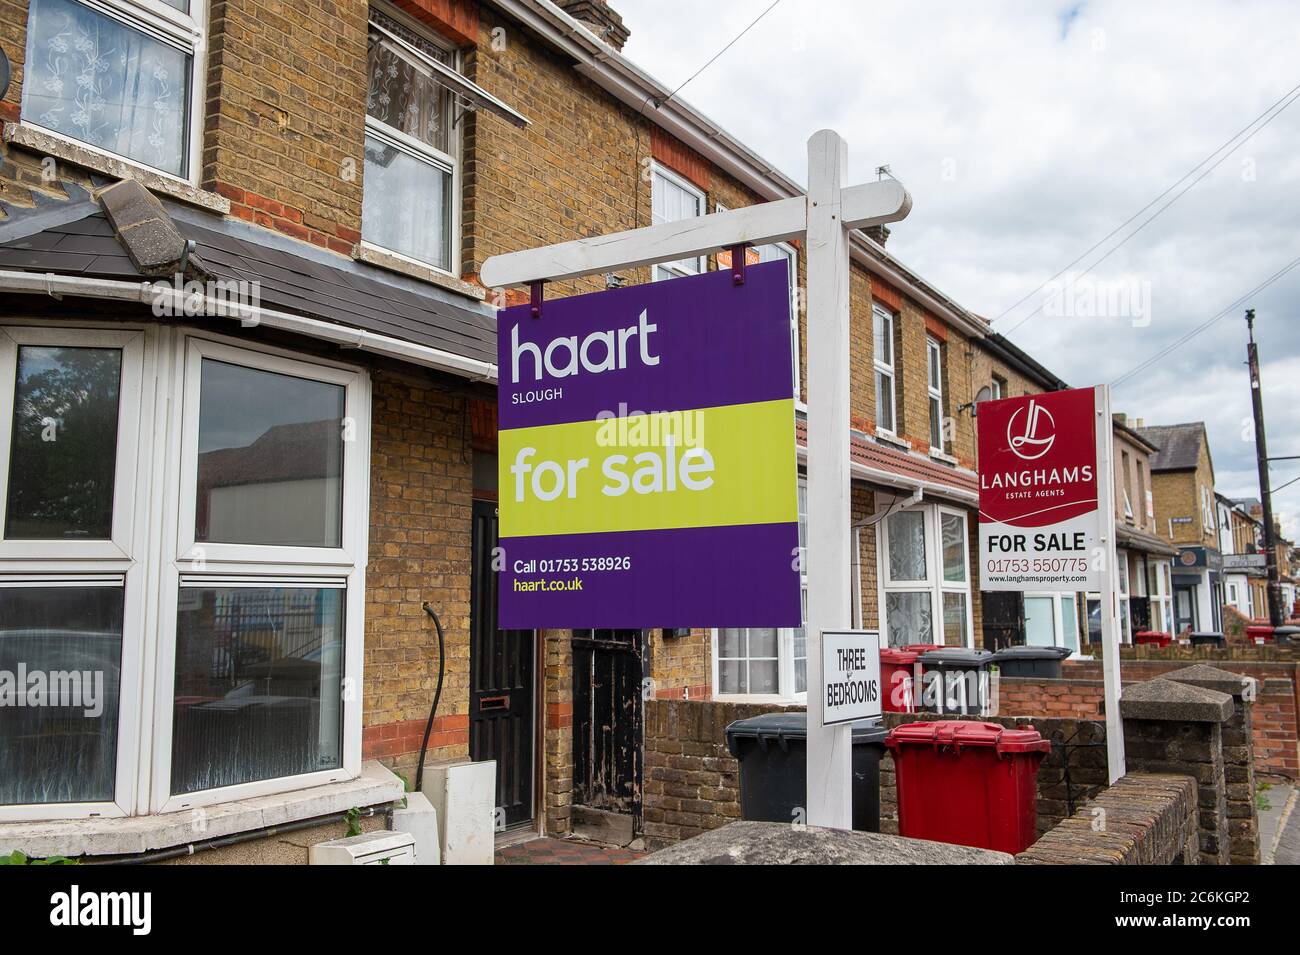 Slough, Berkshire, UK. 10th July, 2020. More properties are expected to come onto the market now following the announcement that the threshold for paying stamp duty up to £500,000 has been removed temporarily following the Coronavirus Pandemic. Credit: Maureen McLean/Alamy Stock Photo